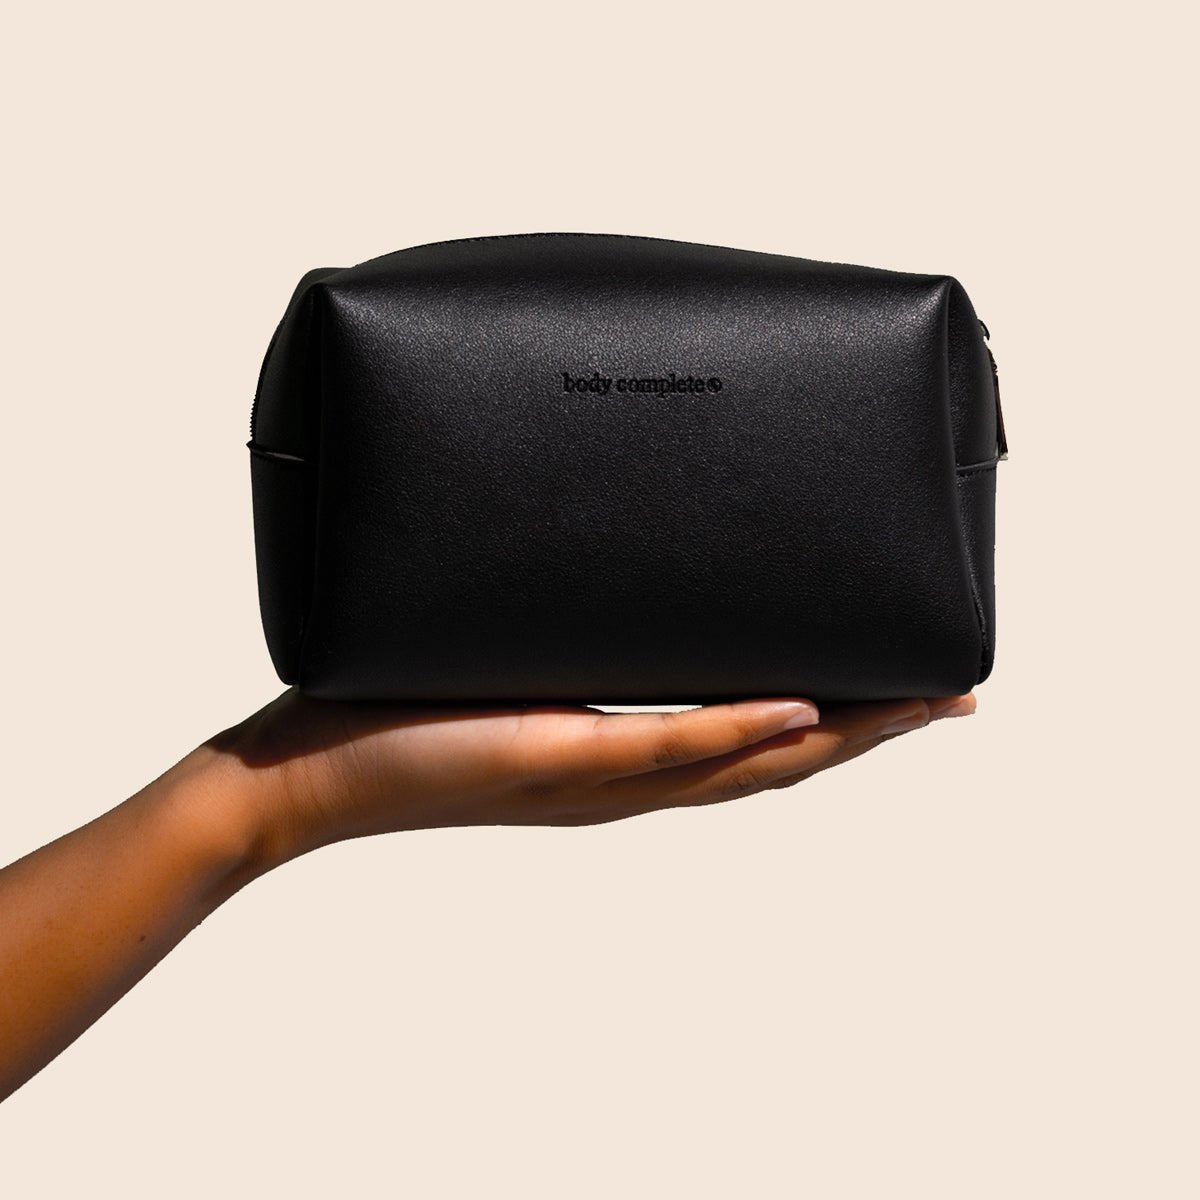 Image of Vegan Leather Toiletry Bag - Carry Your Supplements in Chic Style